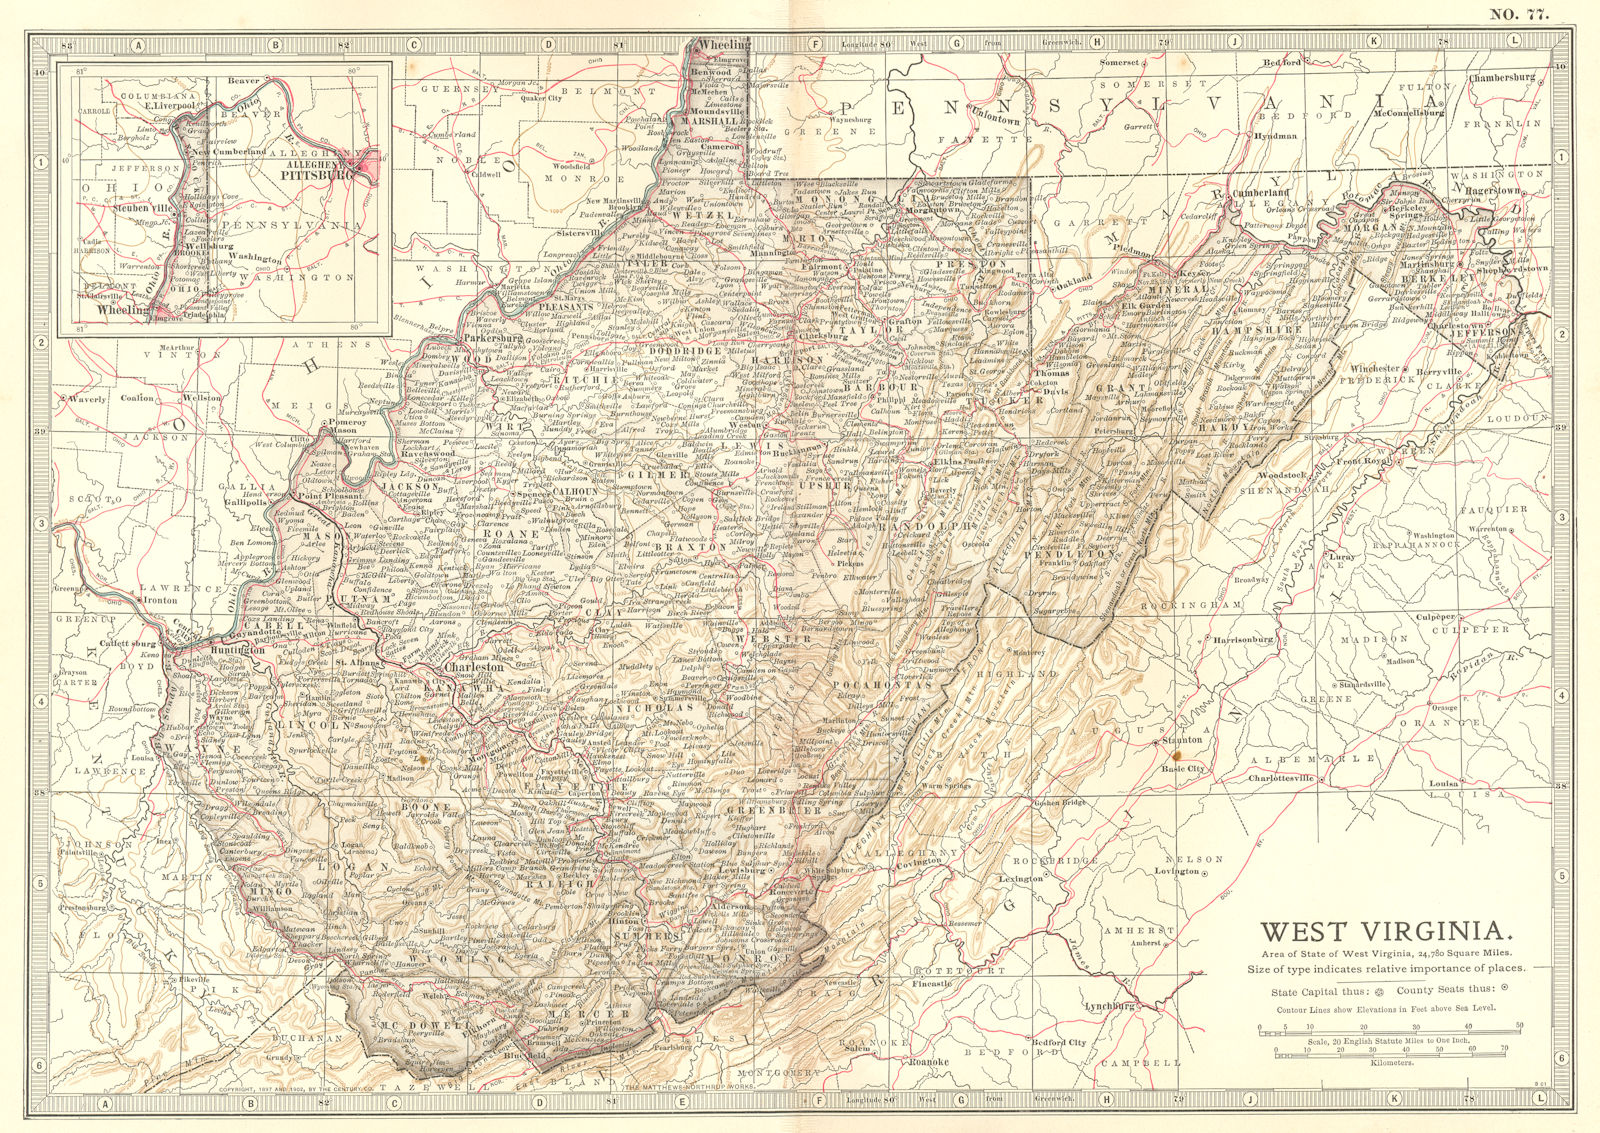 WEST VIRGINIA. State map showing counties. Britannica 10th edition 1903